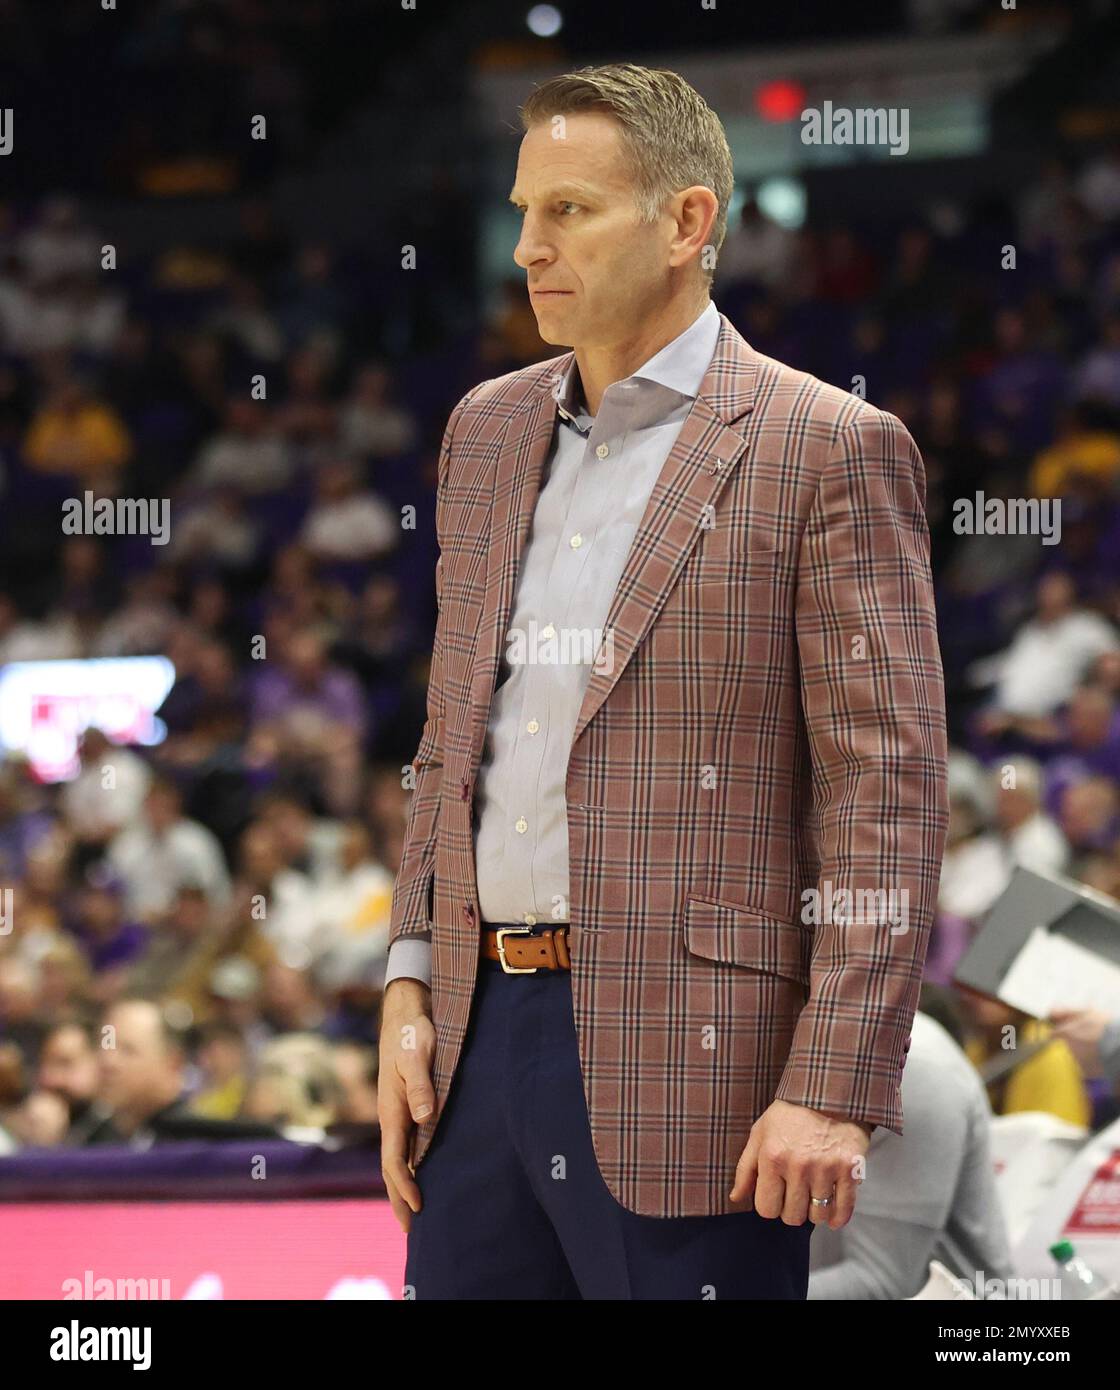 Baton Rouge, USA. 04th Feb, 2023. Alabama Crimson Tide head coach Nate Oats watches his team from the sidelines during a men's college basketball game at the Pete Maravich Assembly Center in Baton Rouge, Louisiana on Saturday, February 4, 2023. (Photo by Peter G. Forest/Sipa USA) Credit: Sipa USA/Alamy Live News Stock Photo